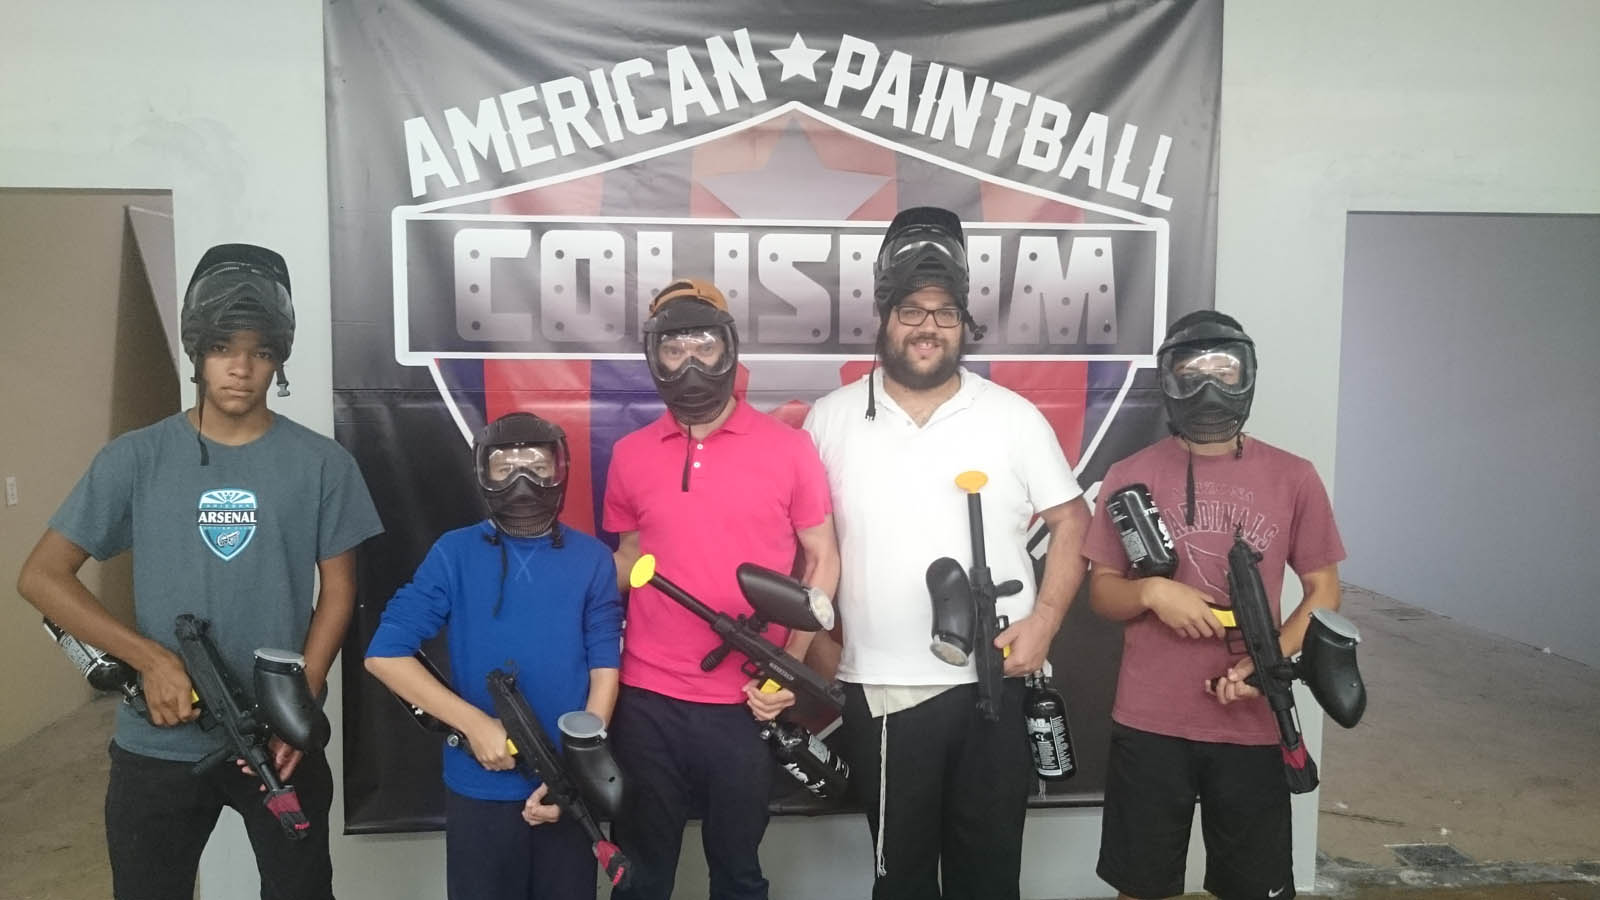 Paintball, Airsoft & Laser Tag FAQs - Reservation, Fields & More